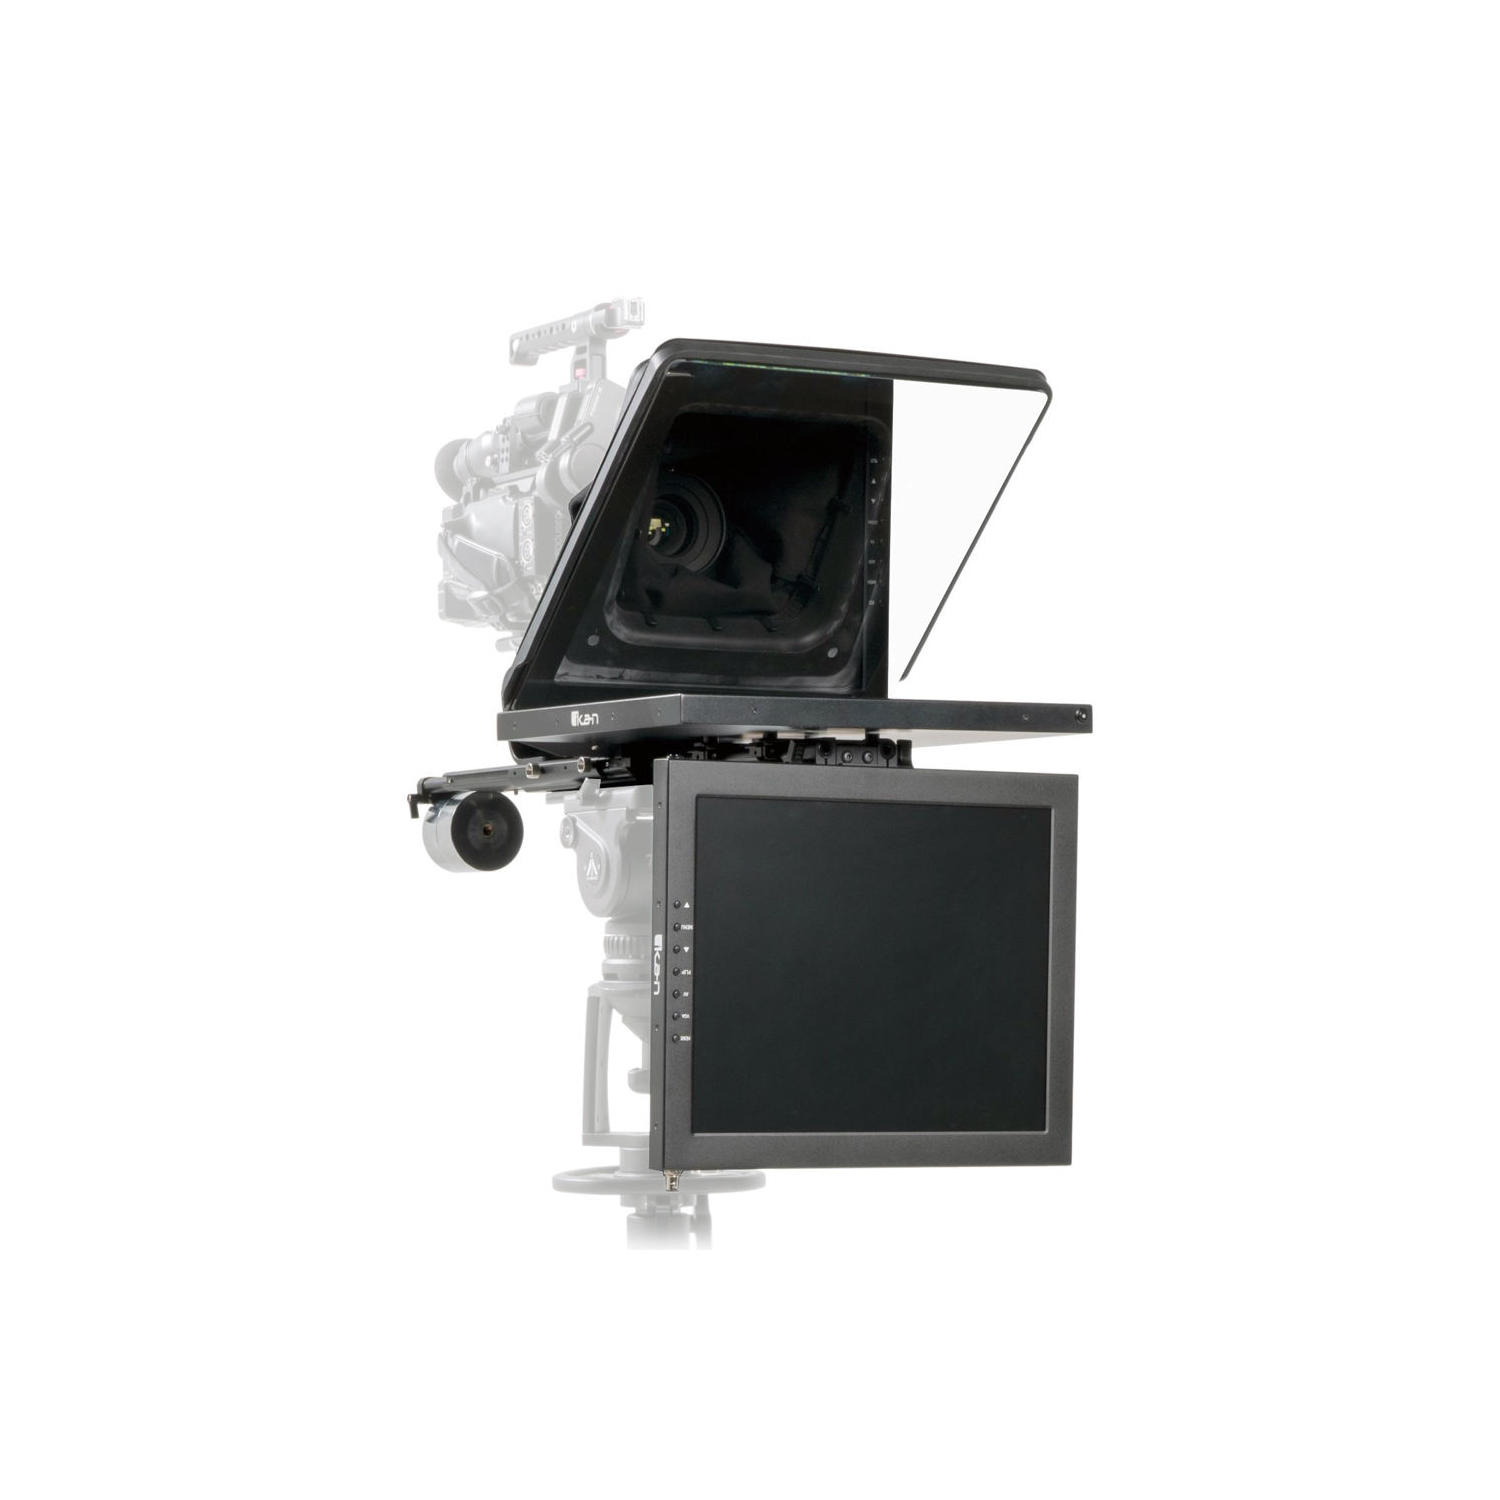 Ikan Professional High-Bright Teleprompter with Talent Monitor Kit (15 ")